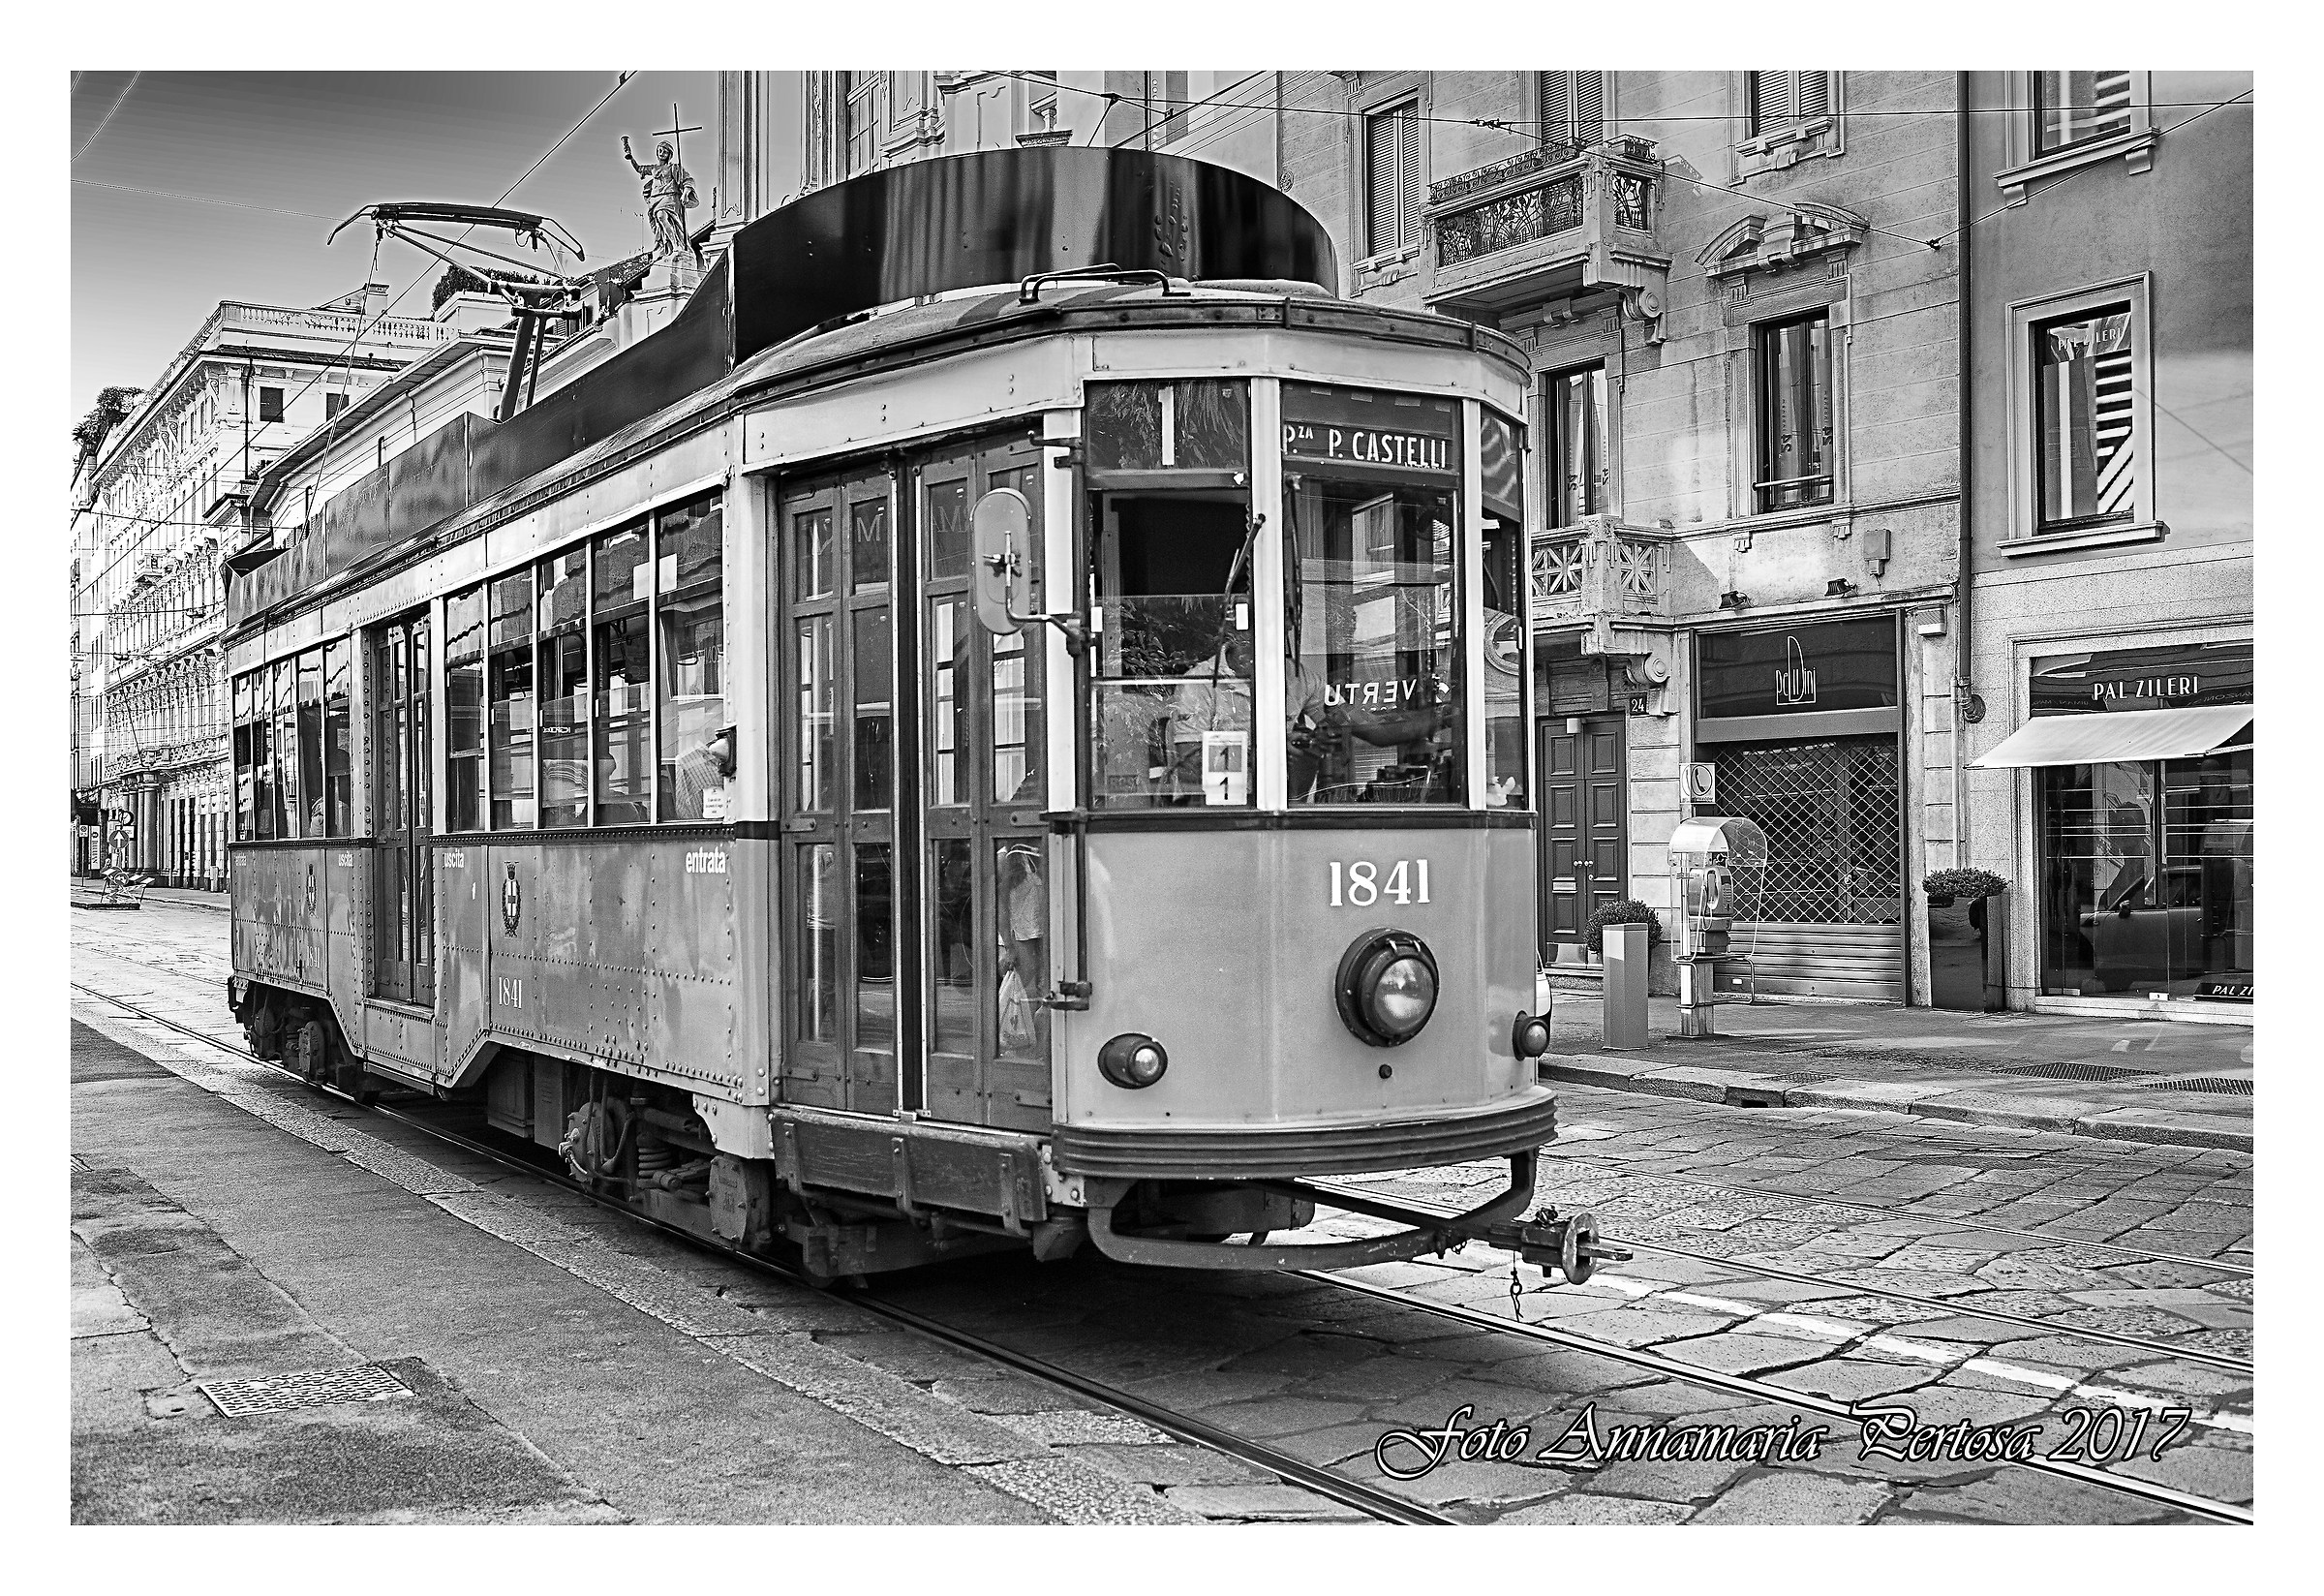 A tour of the oldest tram in Milan...